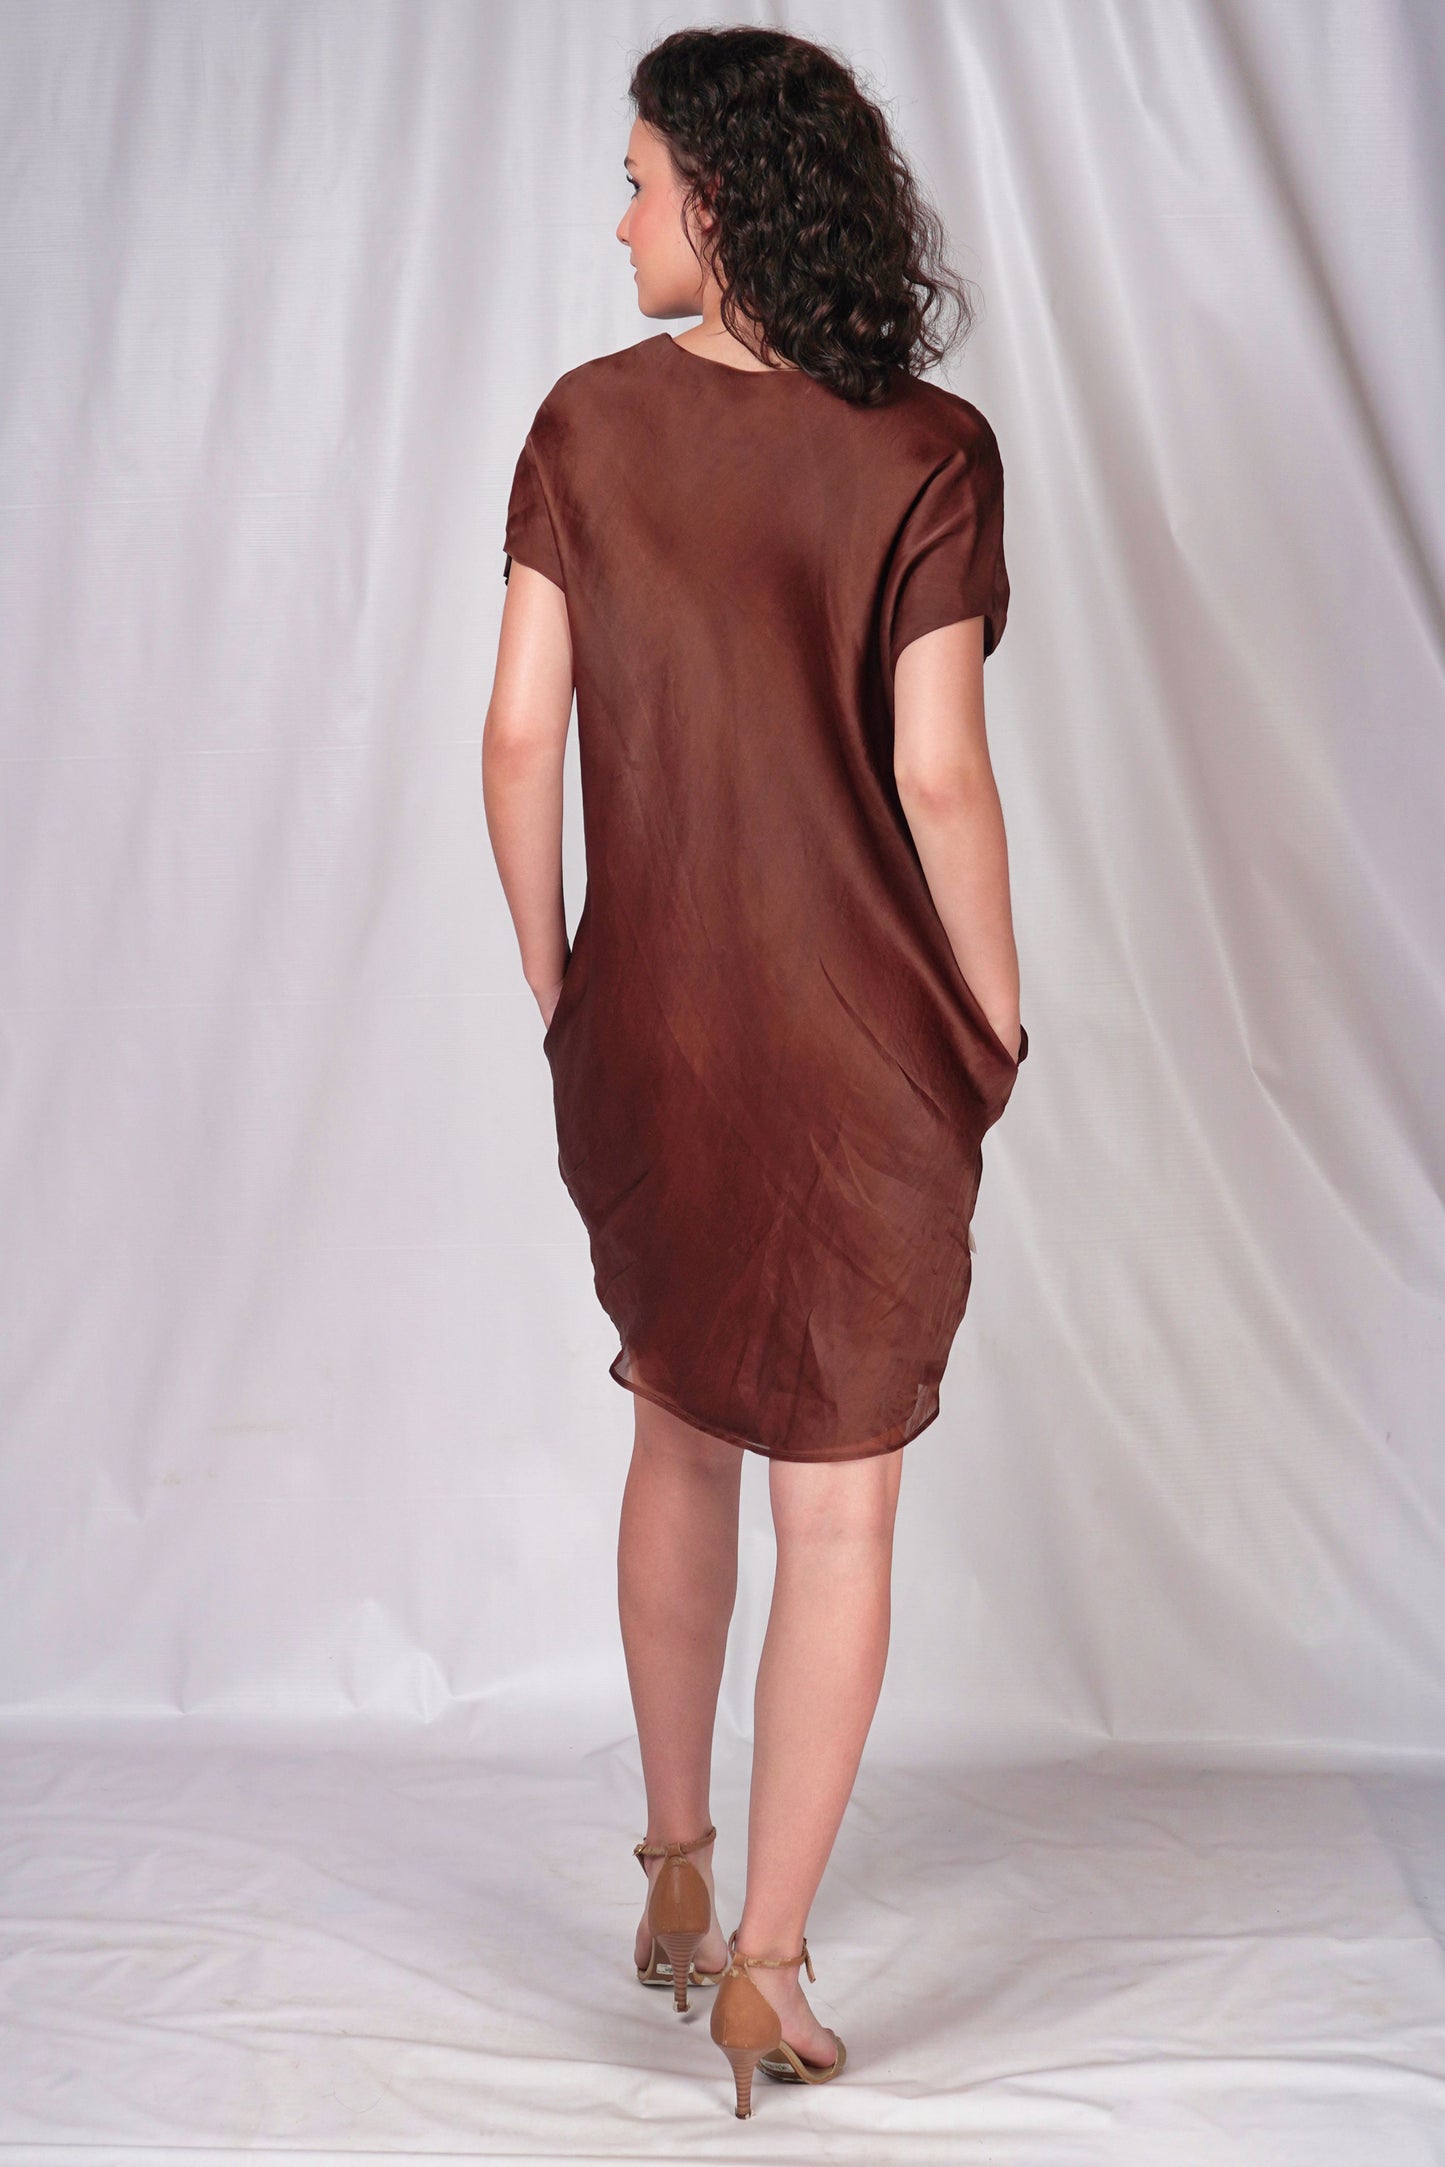 Brown Balloon Dress with Floral Embroidery